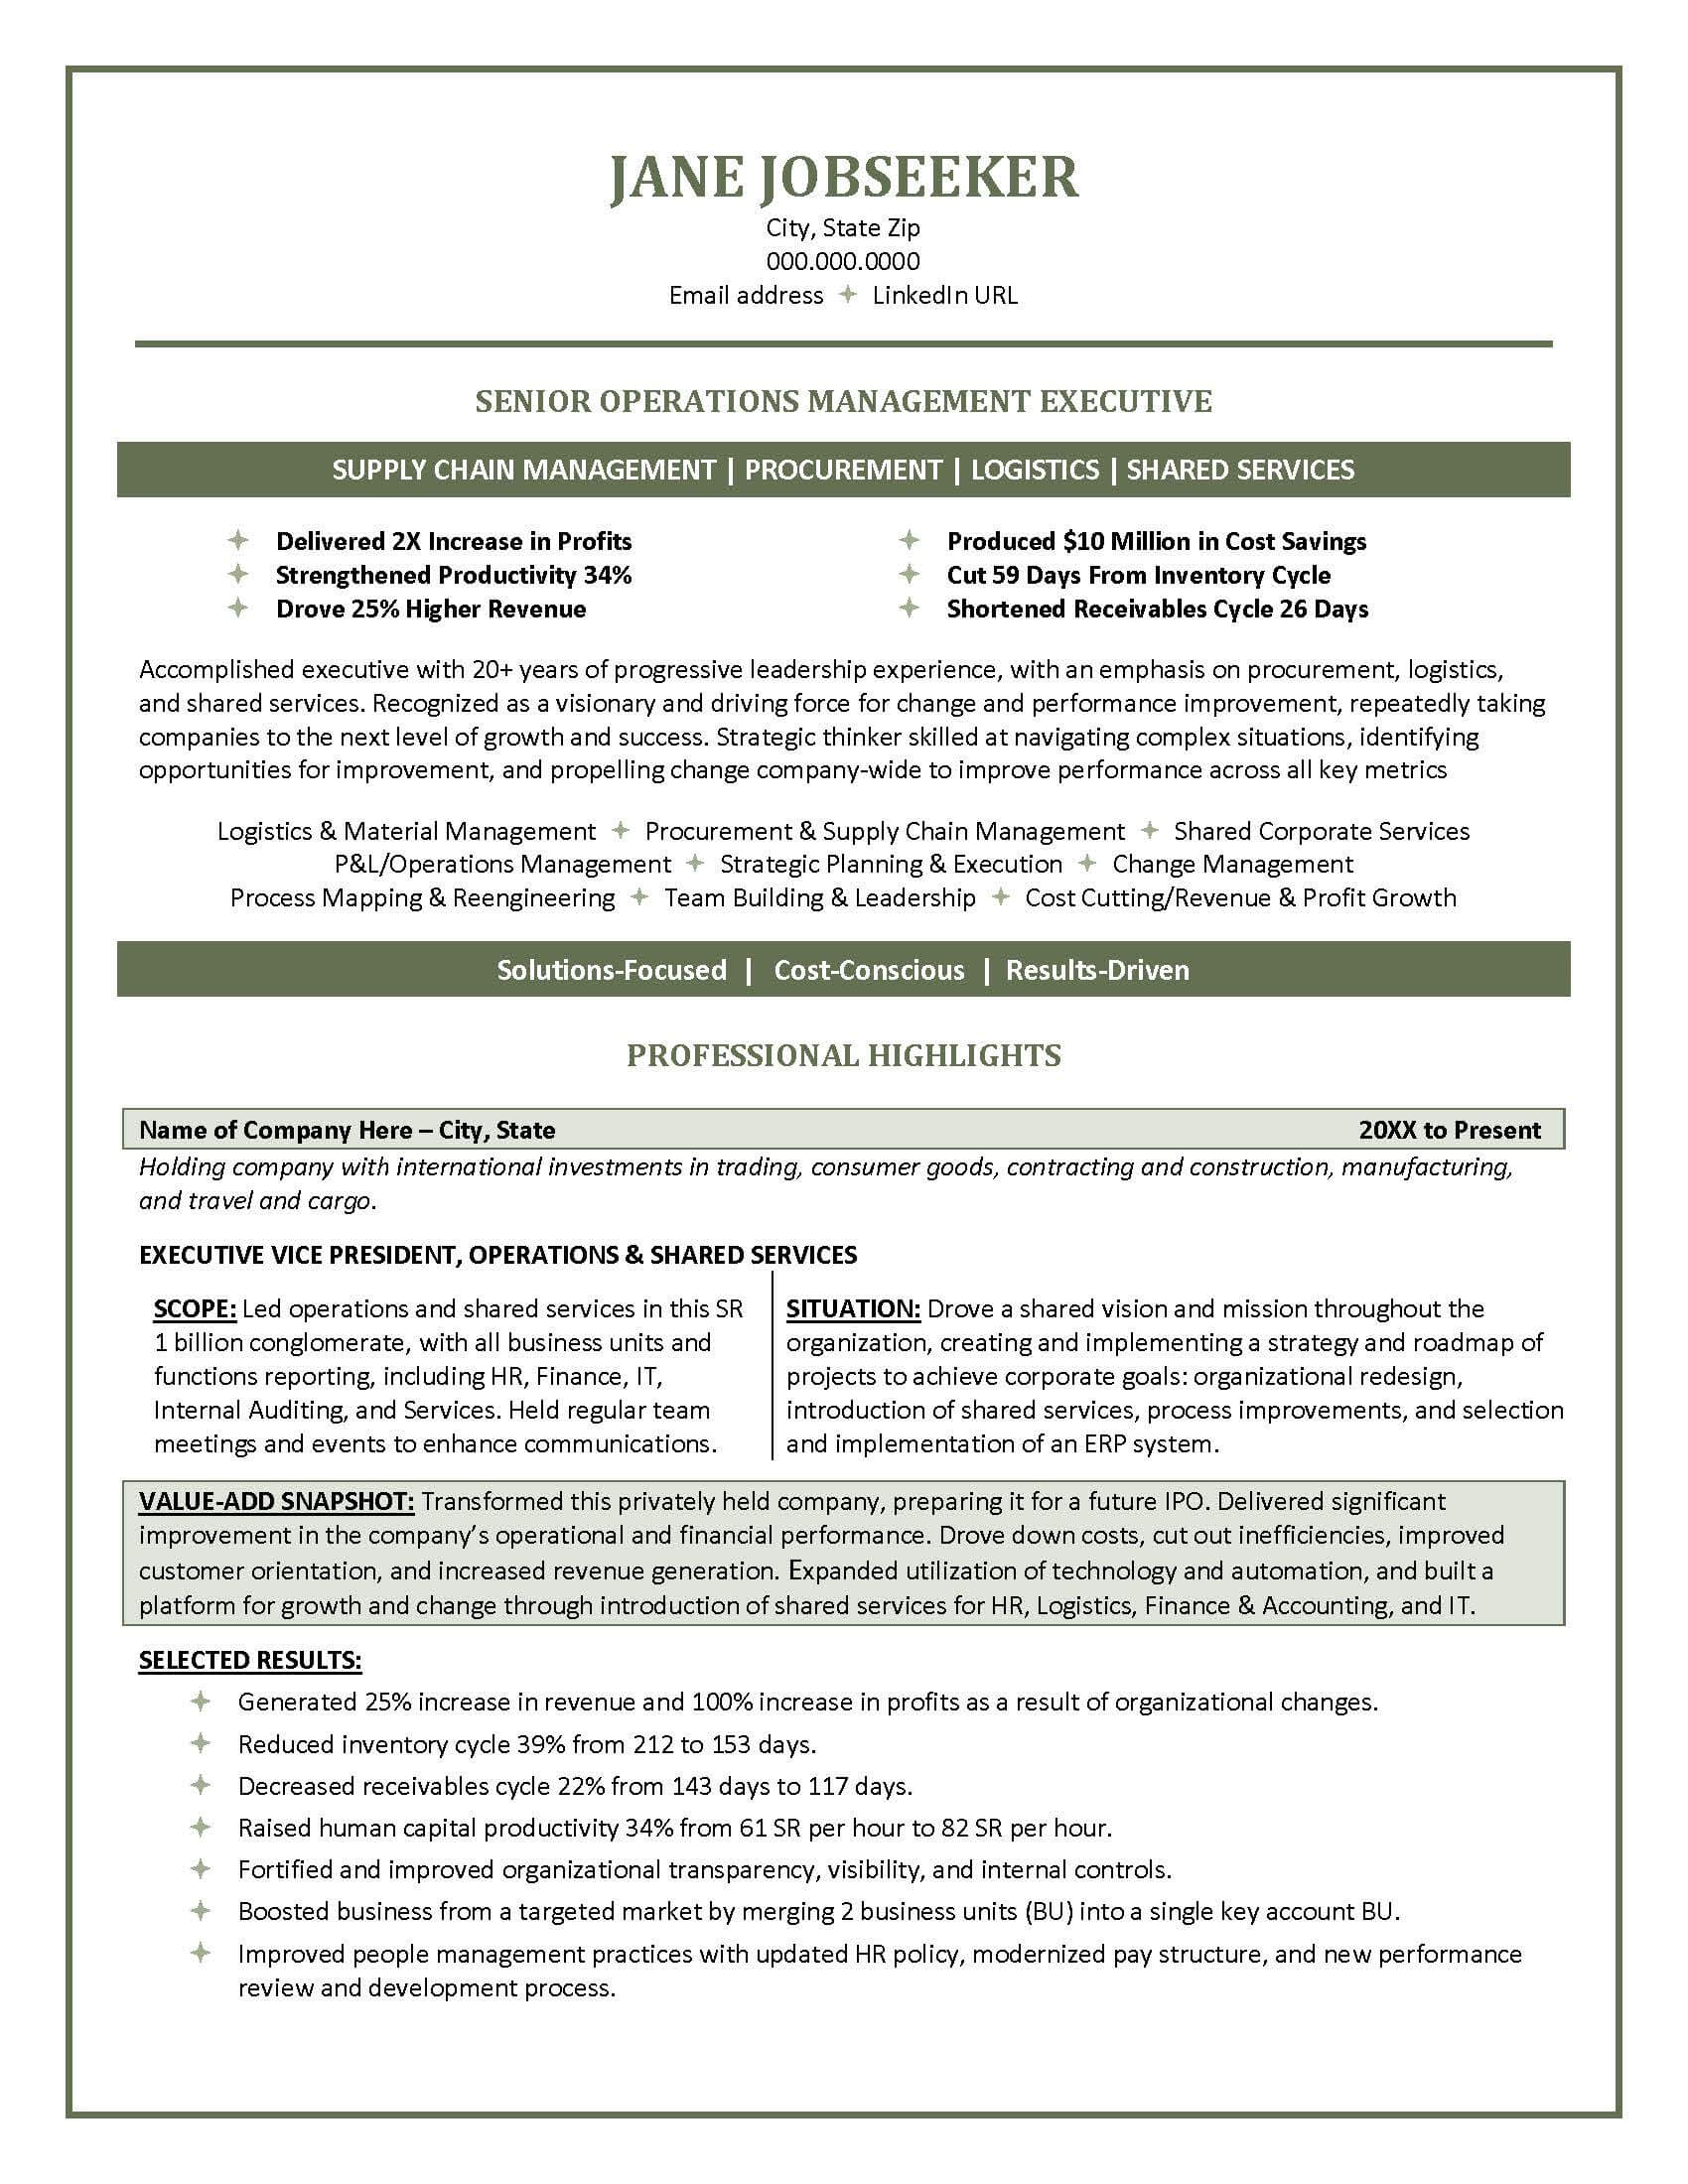 Example Resume with Accomplishment Stories Page 1